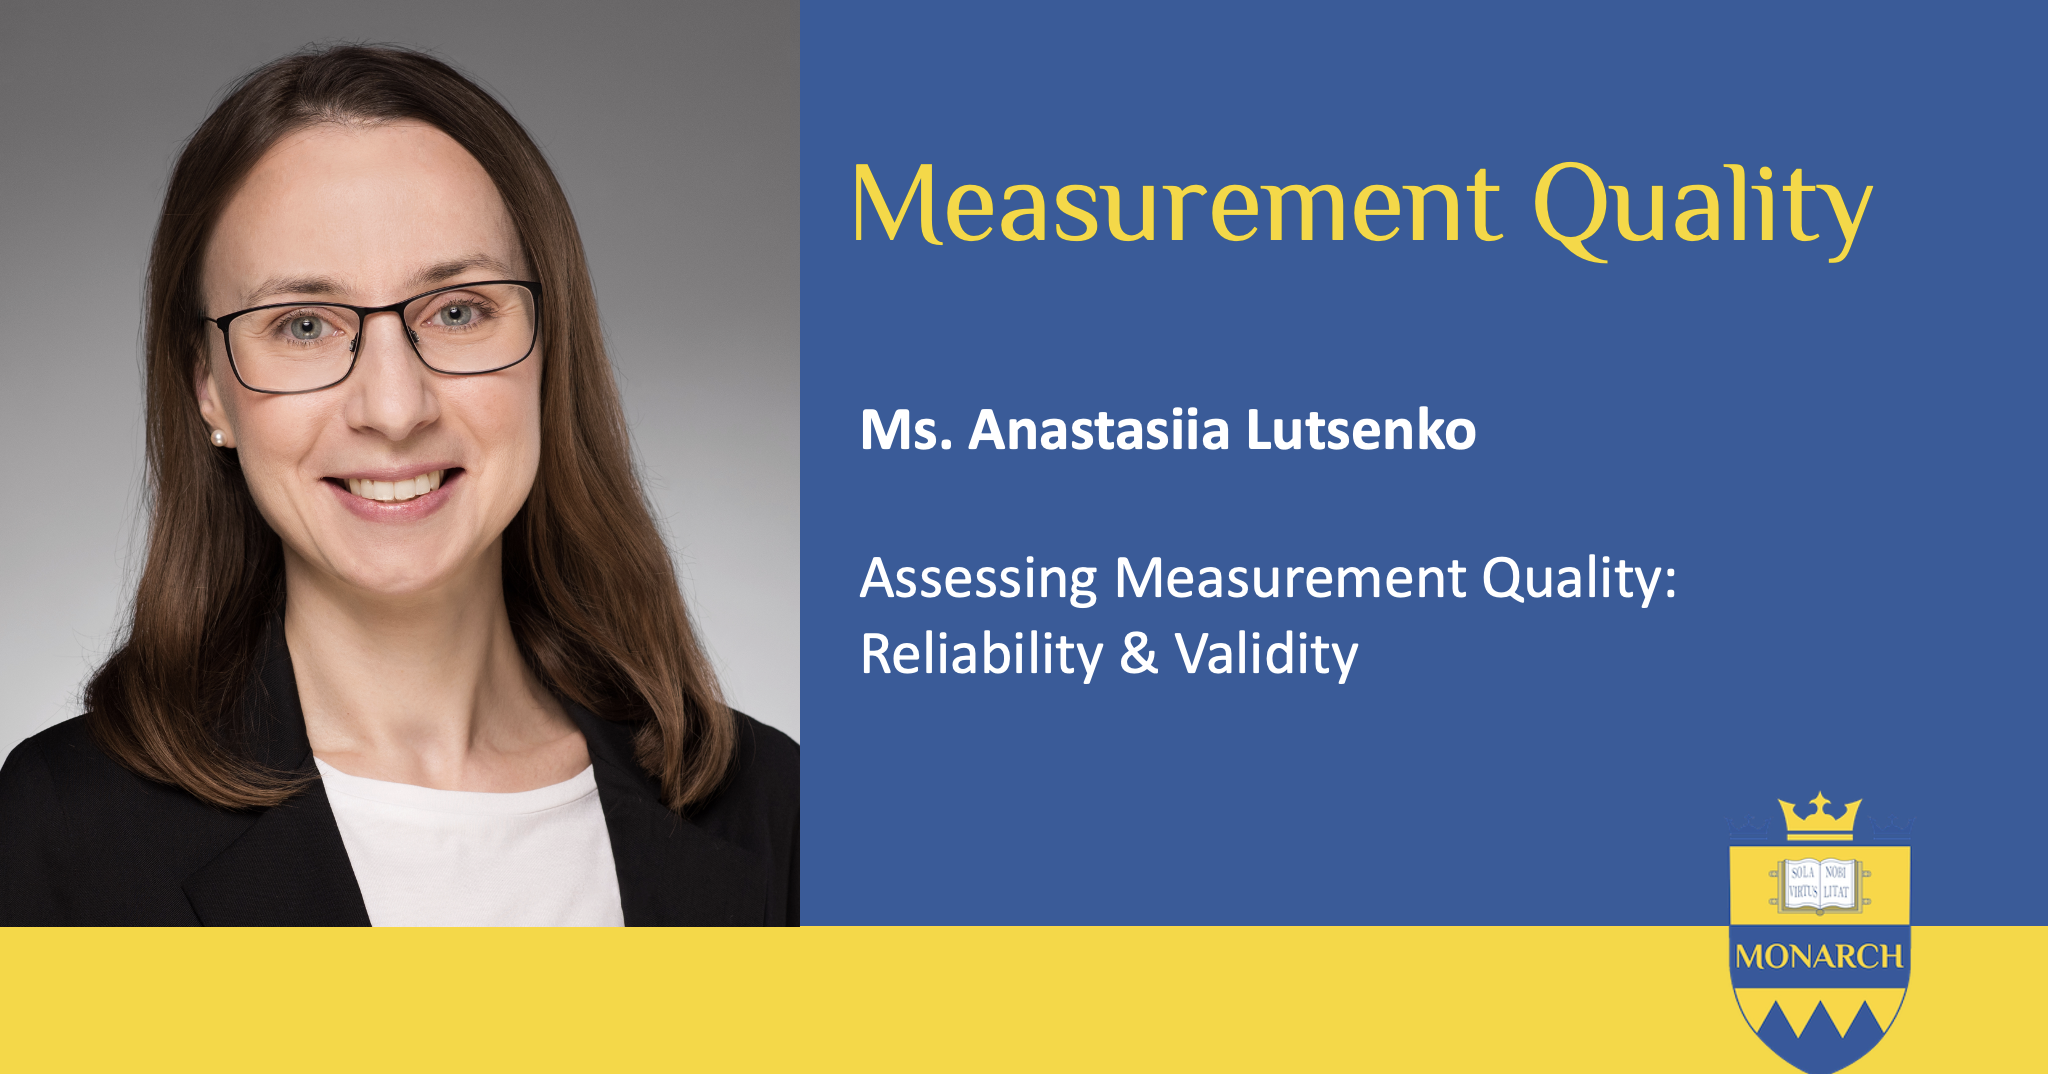 Assessing Measurement Quality: Reliability & Validity